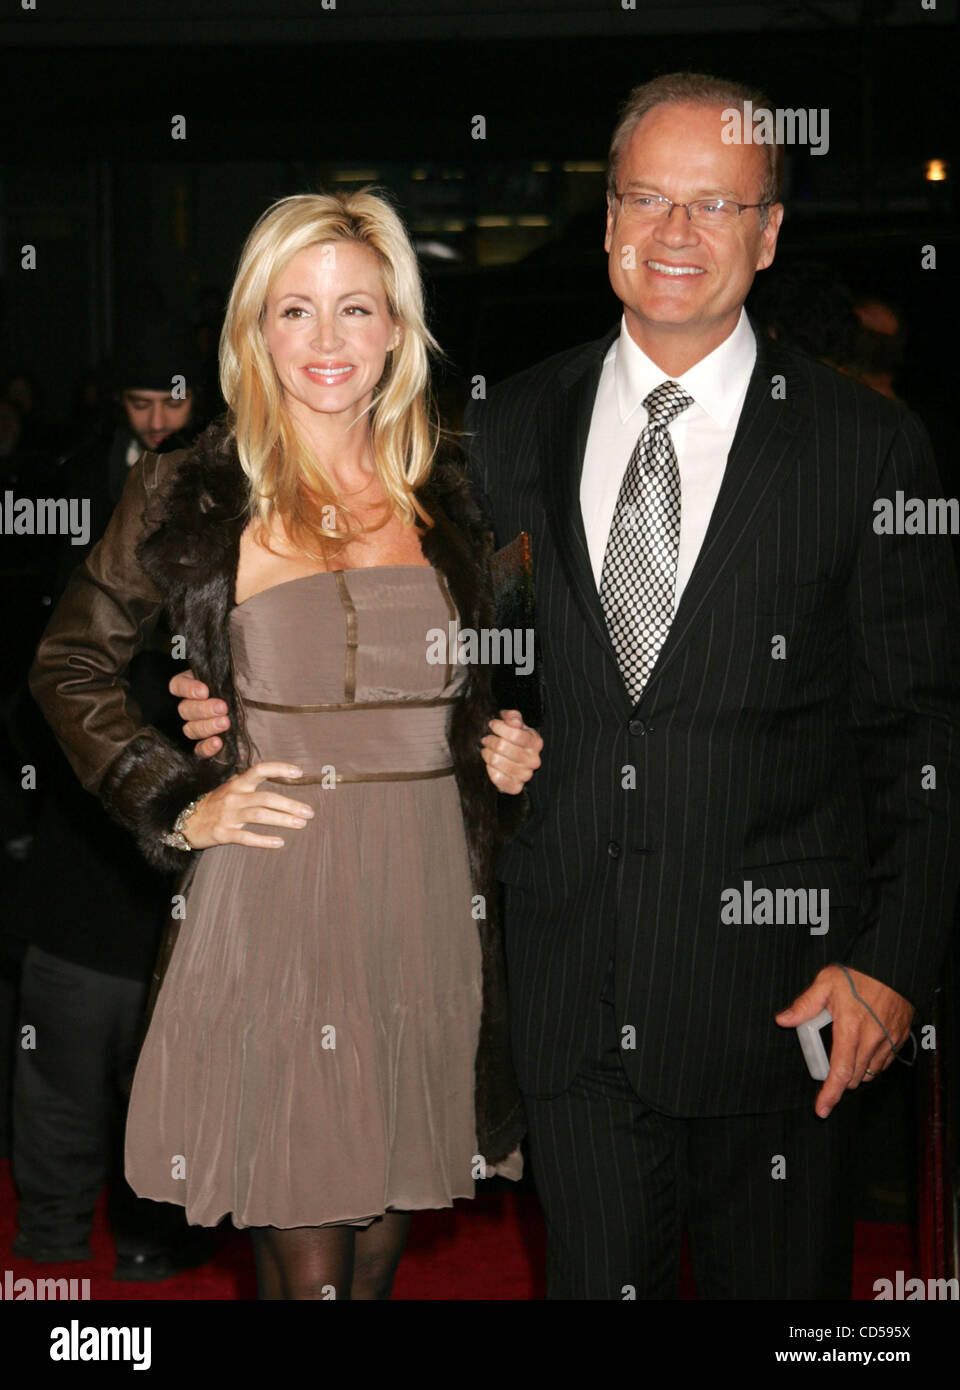 Nov 24, 2008 - New York, NY, USA -Actor KELSEY GRAMMER and wife CAMILLE ...